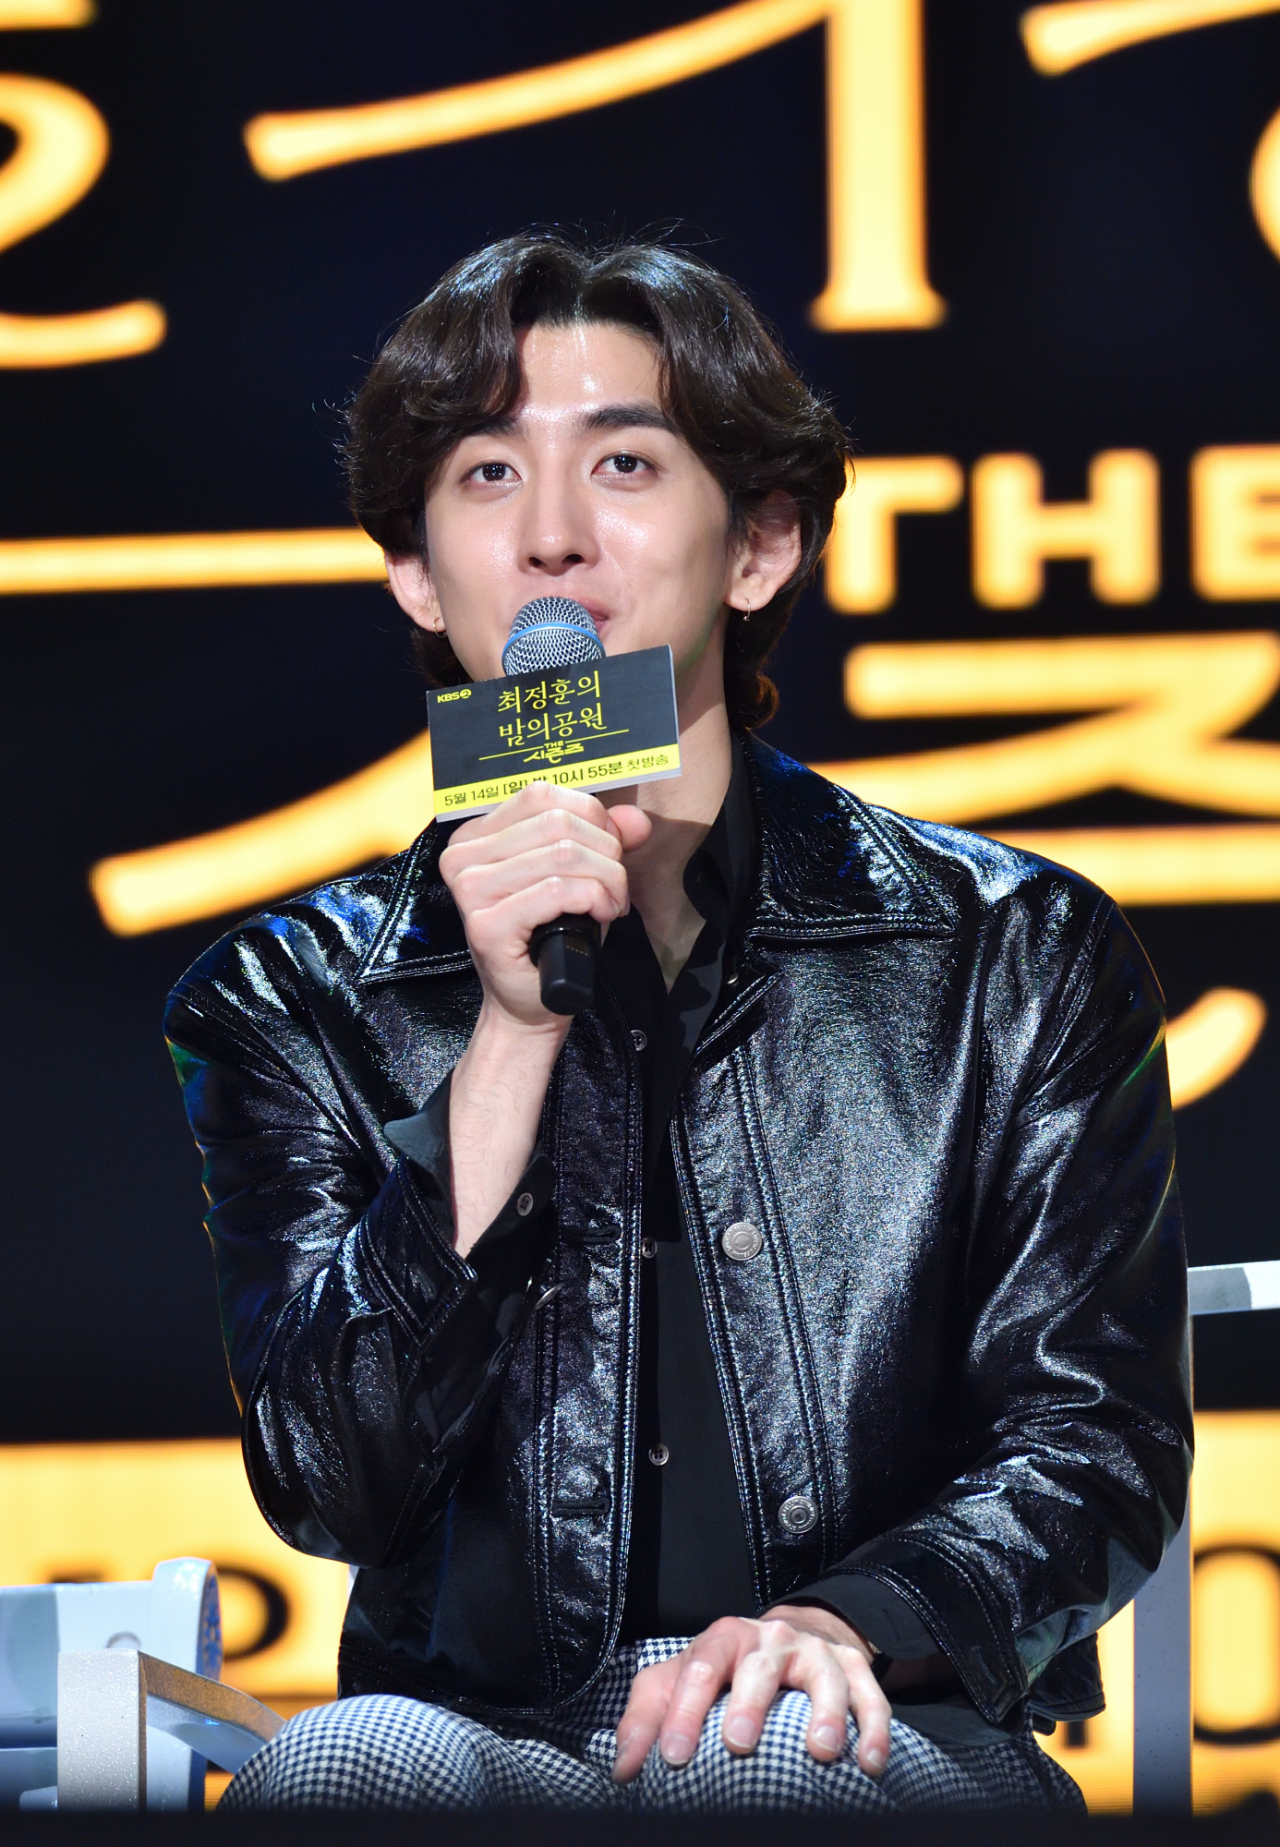 Singer Choi Jung-hoon introduces the new season of the late-night KBS music talk show, 